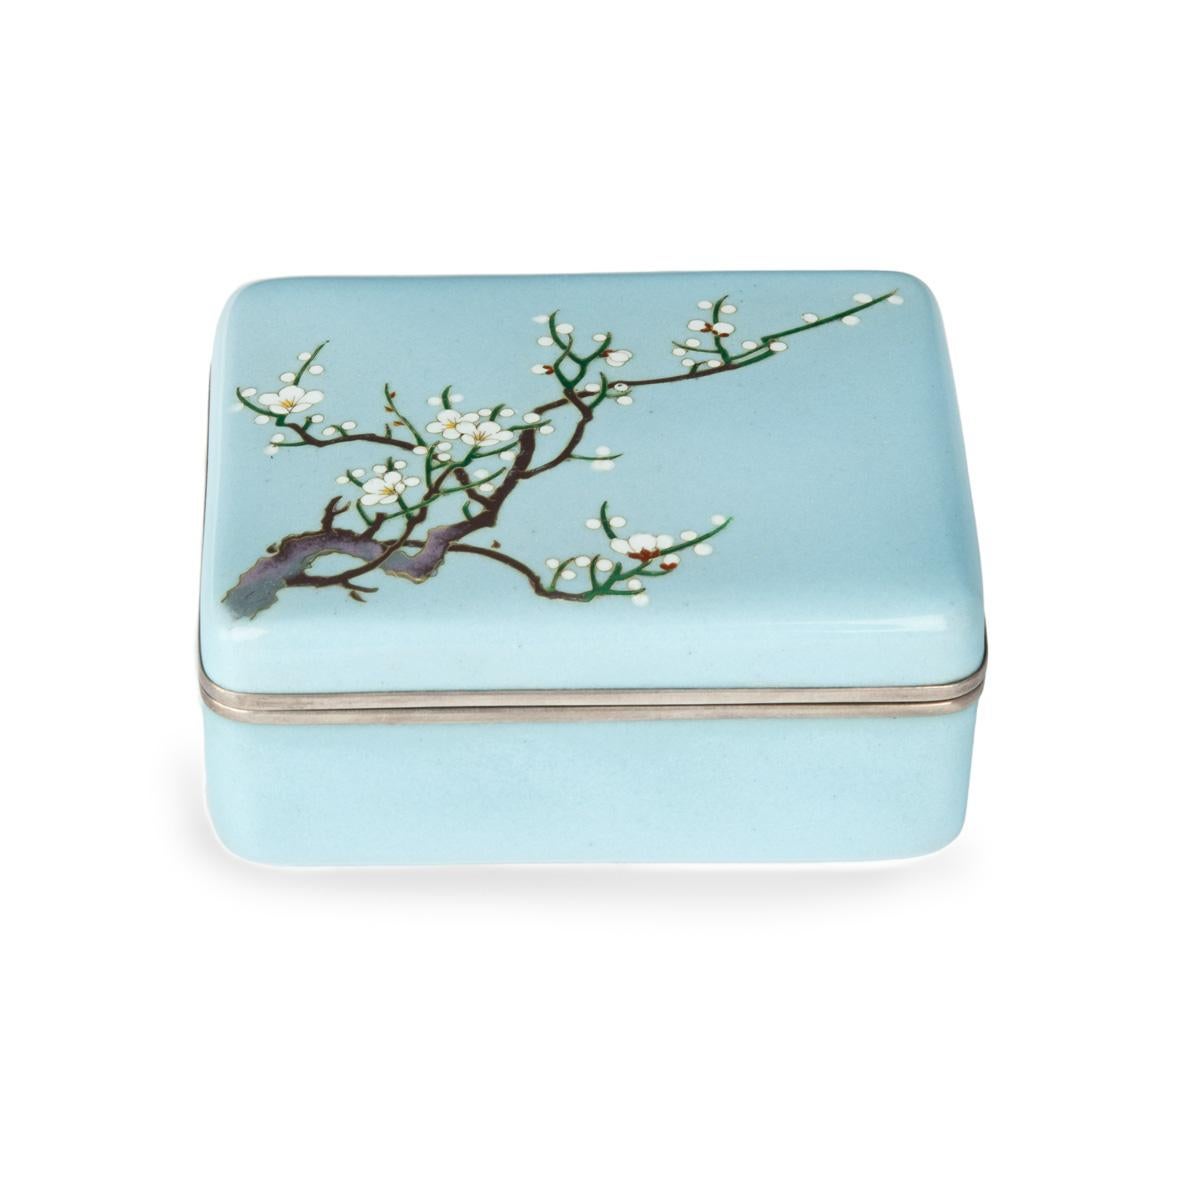 20th Century A small Showa period cloisonné box with a single branch of blossom For Sale